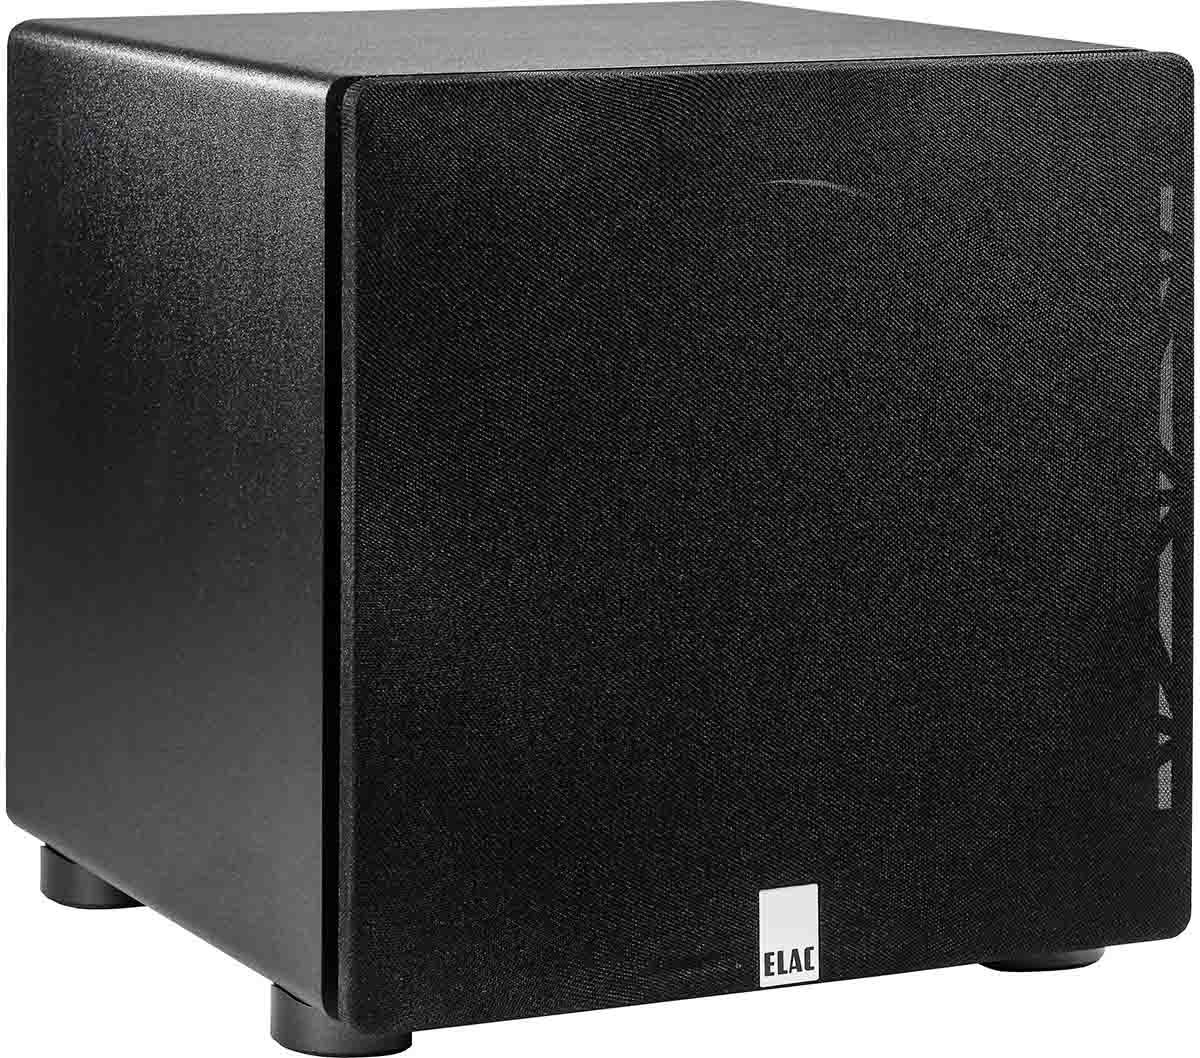 ELAC PS250 Left Front View Covered in Black Ask